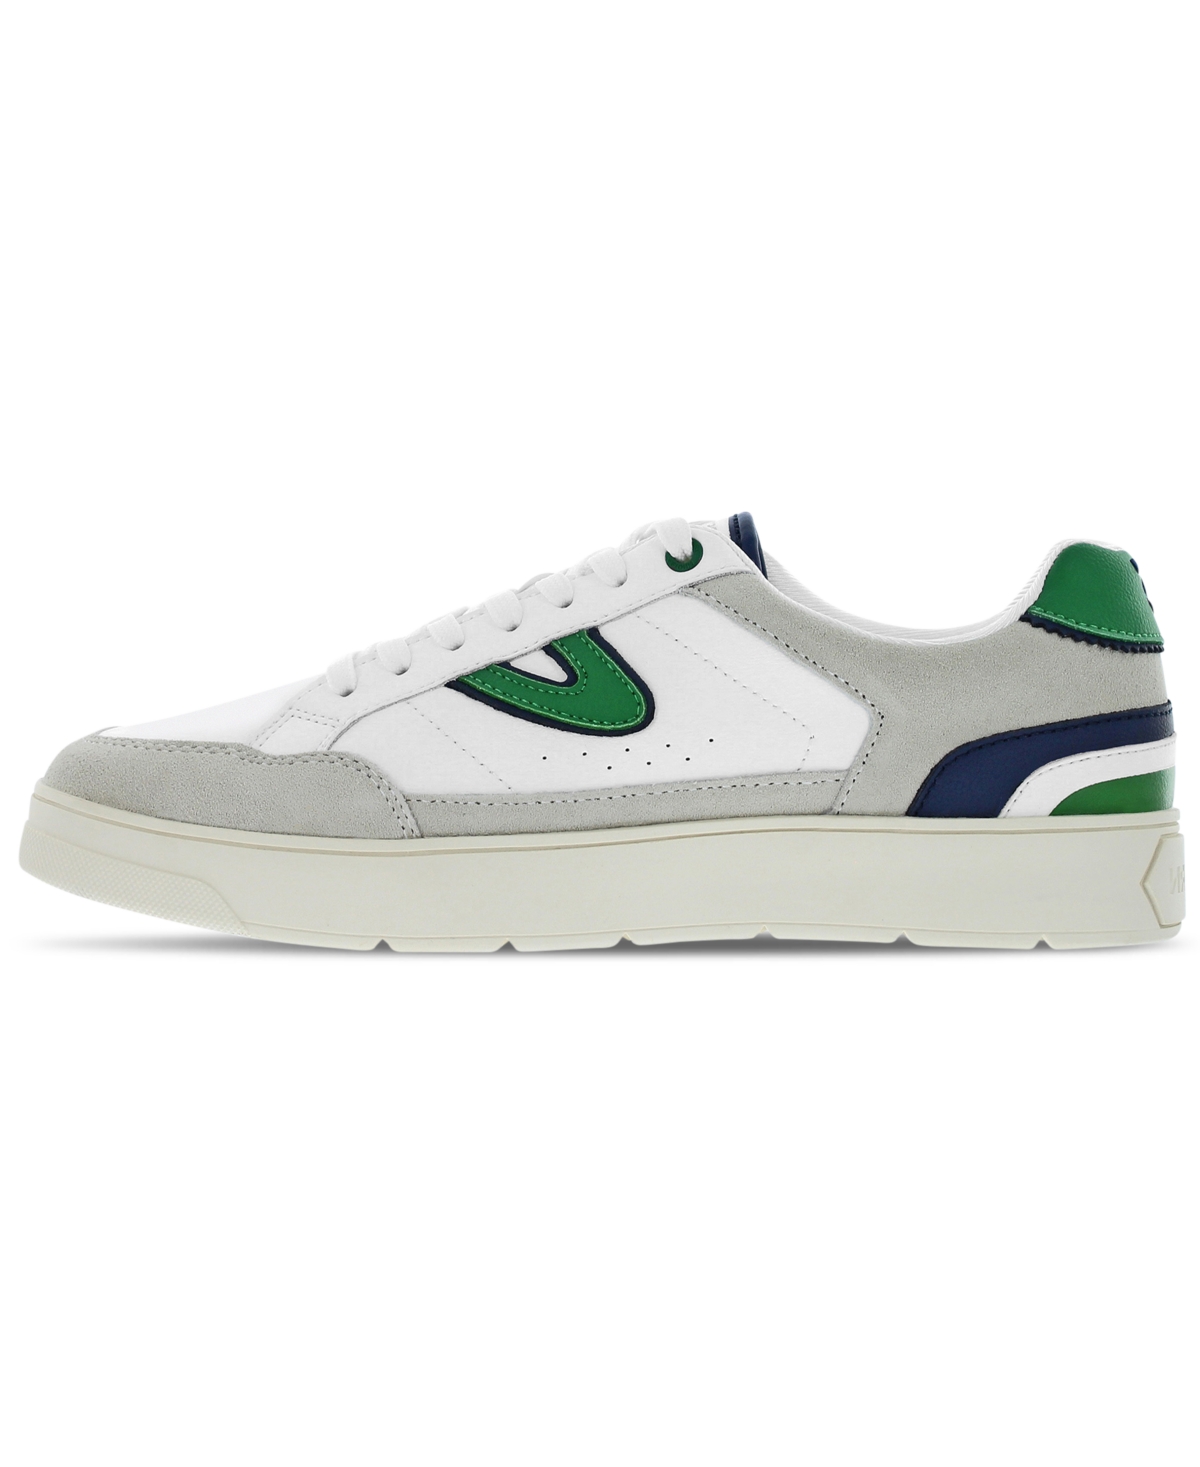 Shop Tretorn Women's Harlow Elite Casual Sneakers From Finish Line In White,green